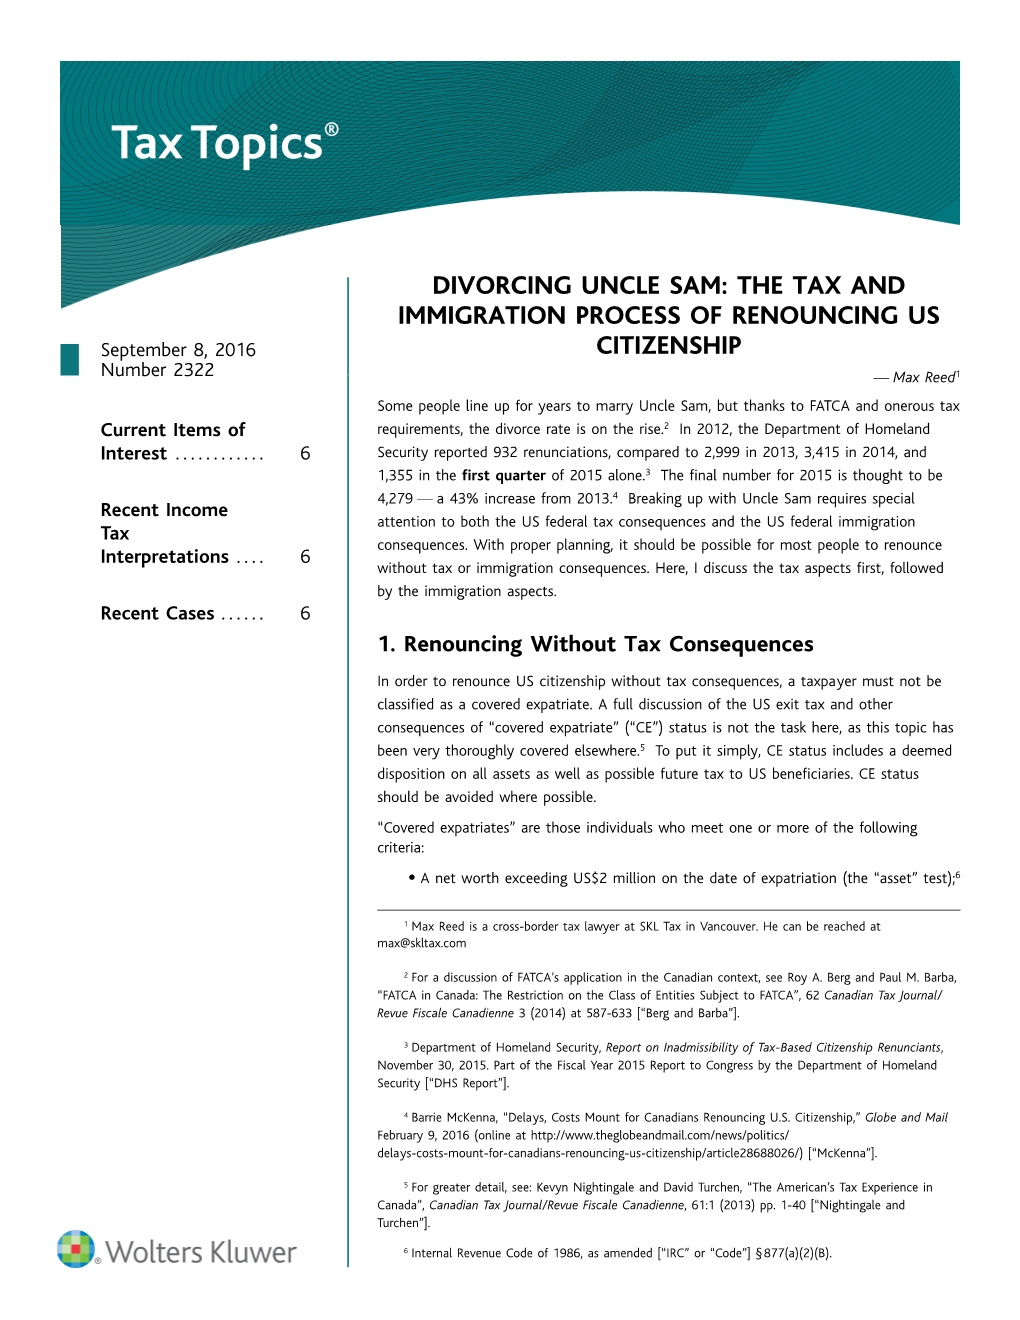 The Tax and Immigration Process of Renouncing Us Citizenship